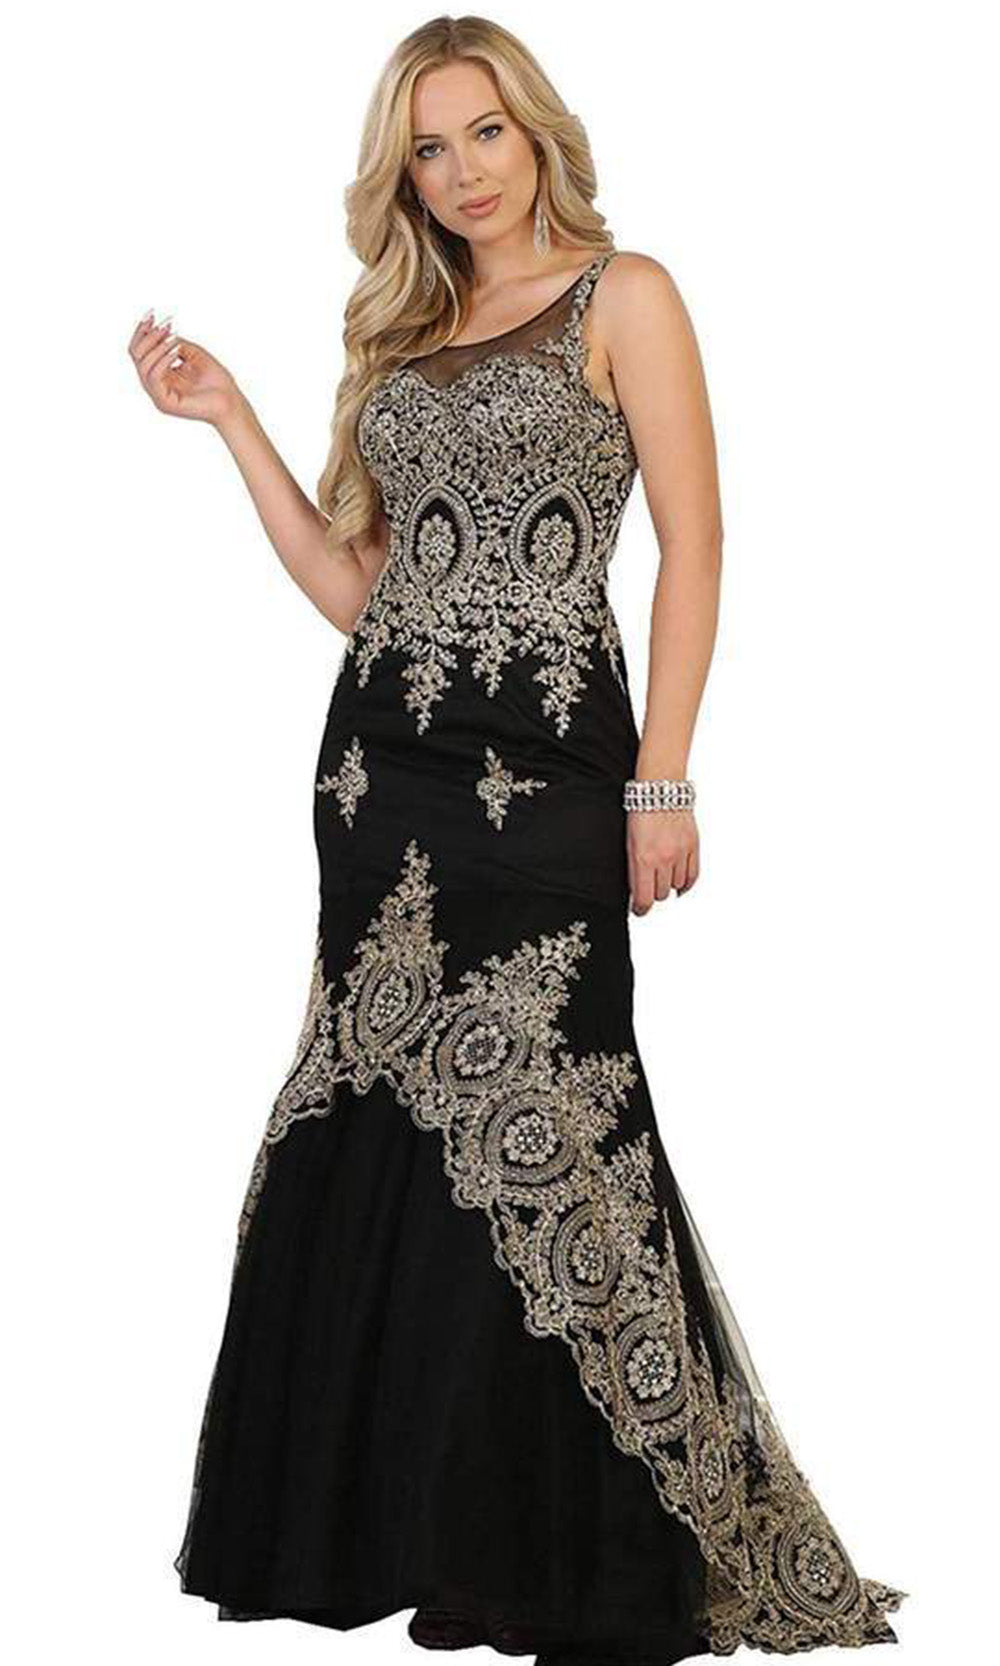 May Queen - Gilt Lace Illusion Scoop Trumpet Dress In Black and Gold